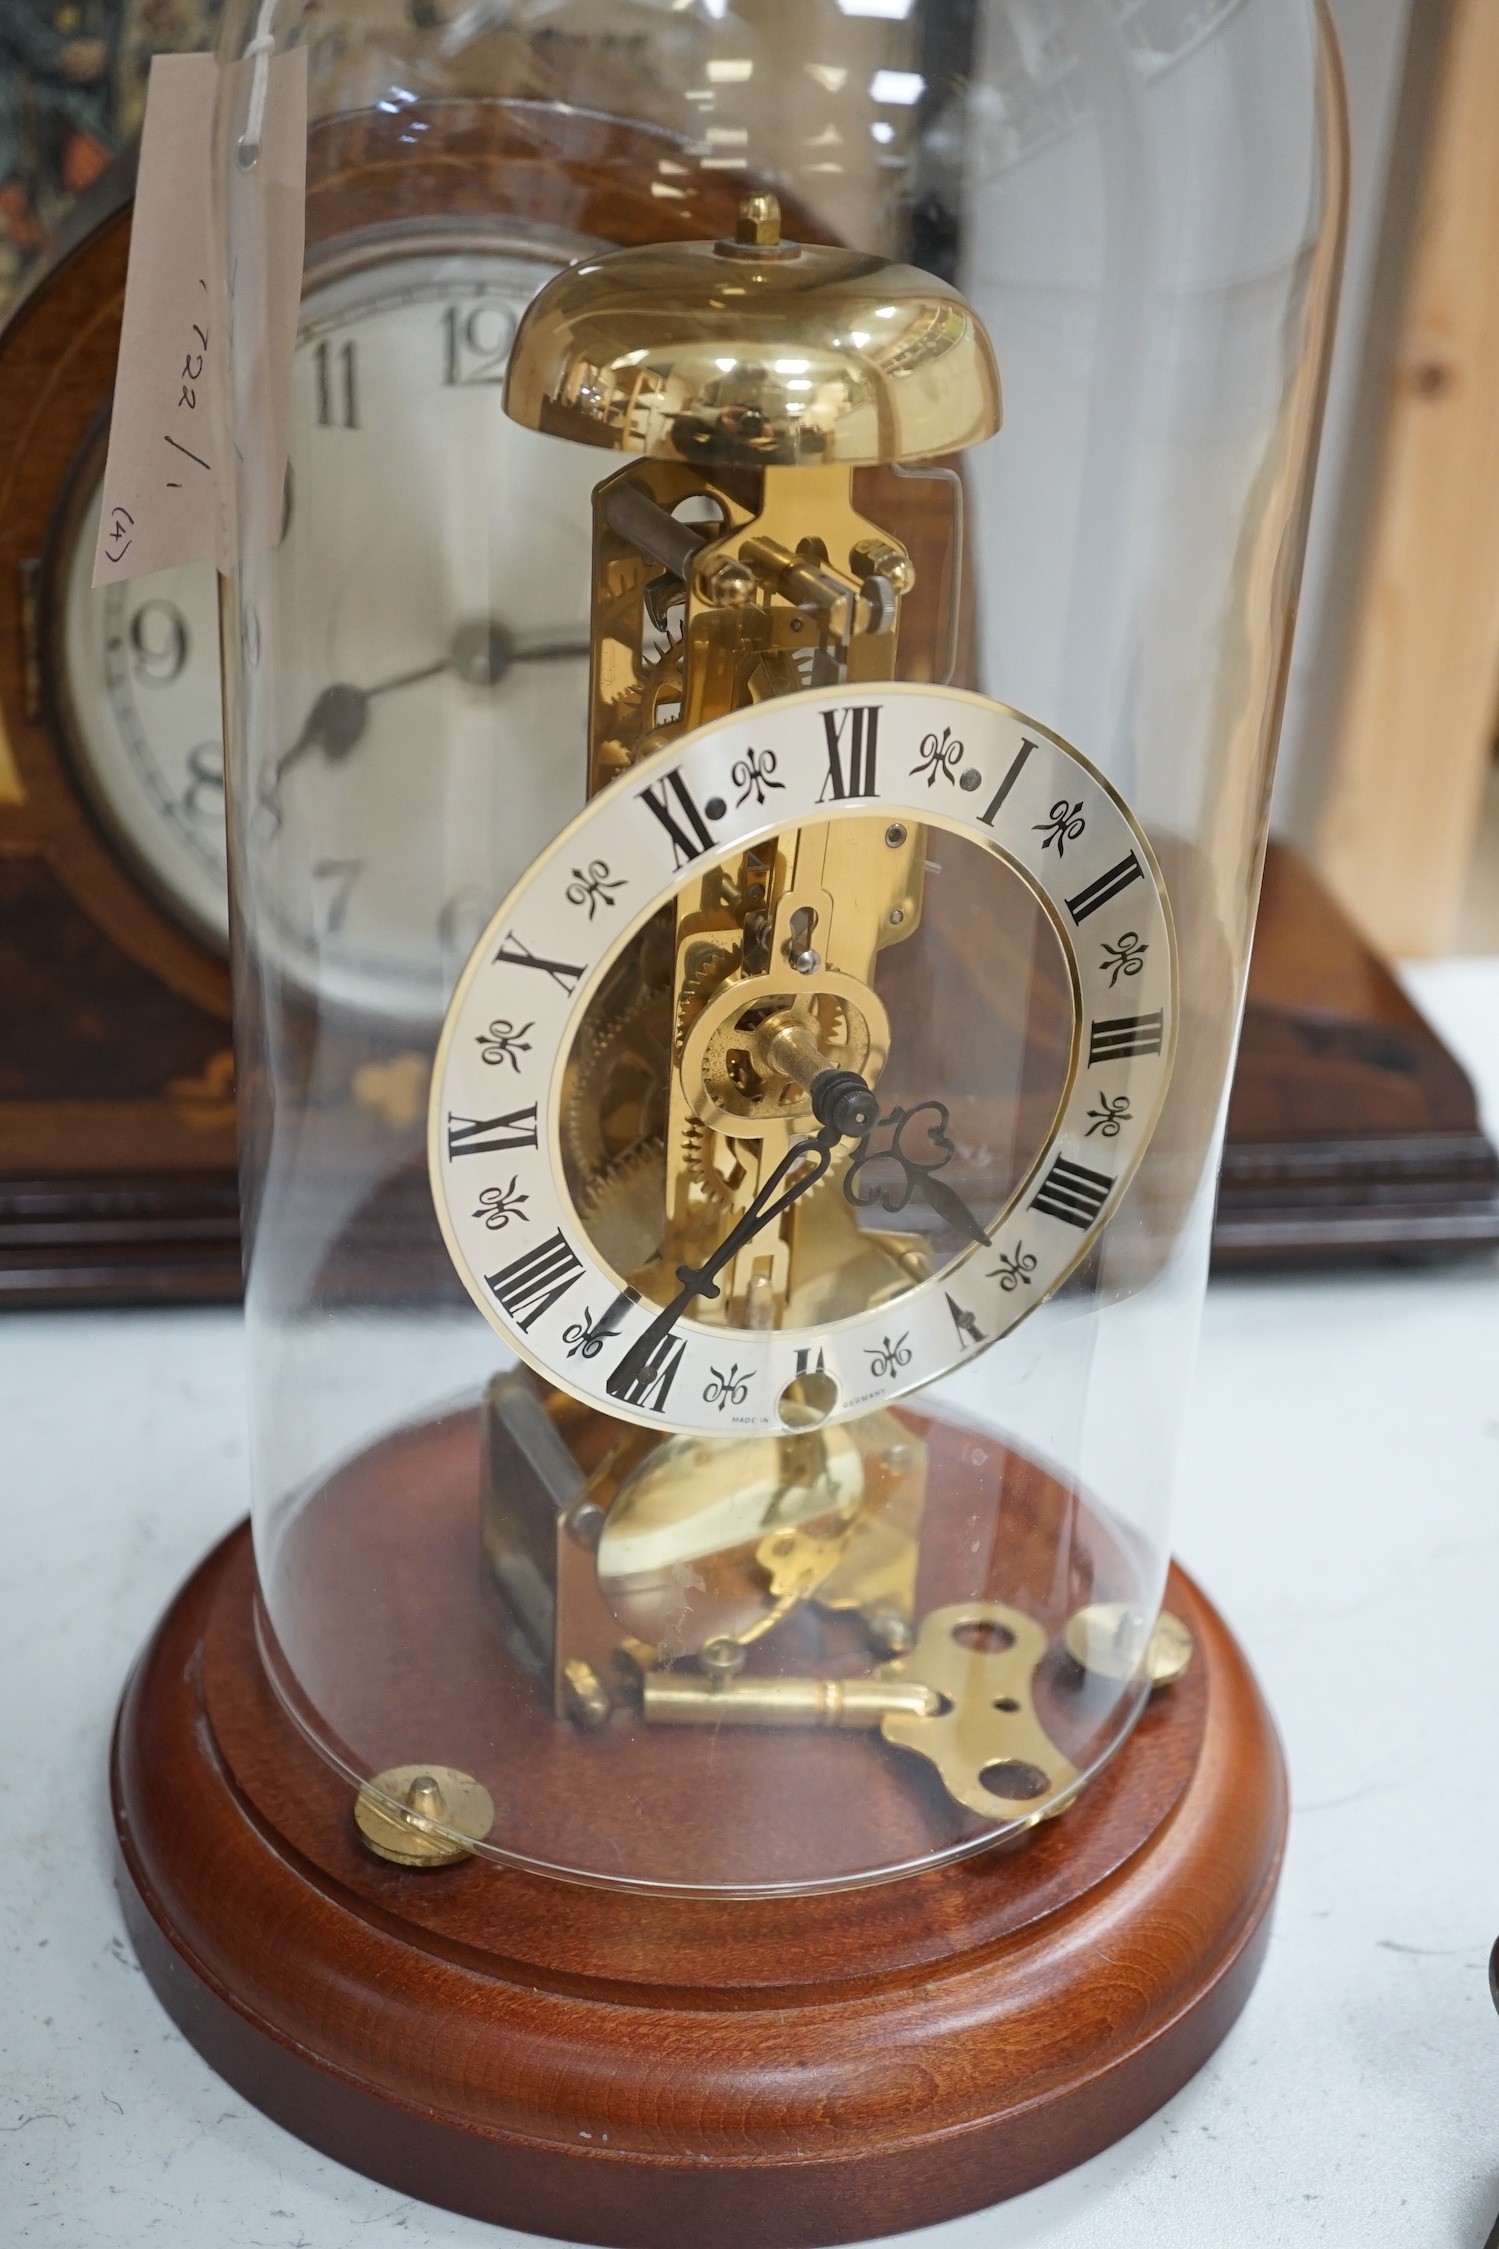 An early 20th century inlaid mahogany mantel clock, a skeleton clock under glass dome, a brass desk calendar and a 19th century French framed print, skeleton clock and dome 32cms high